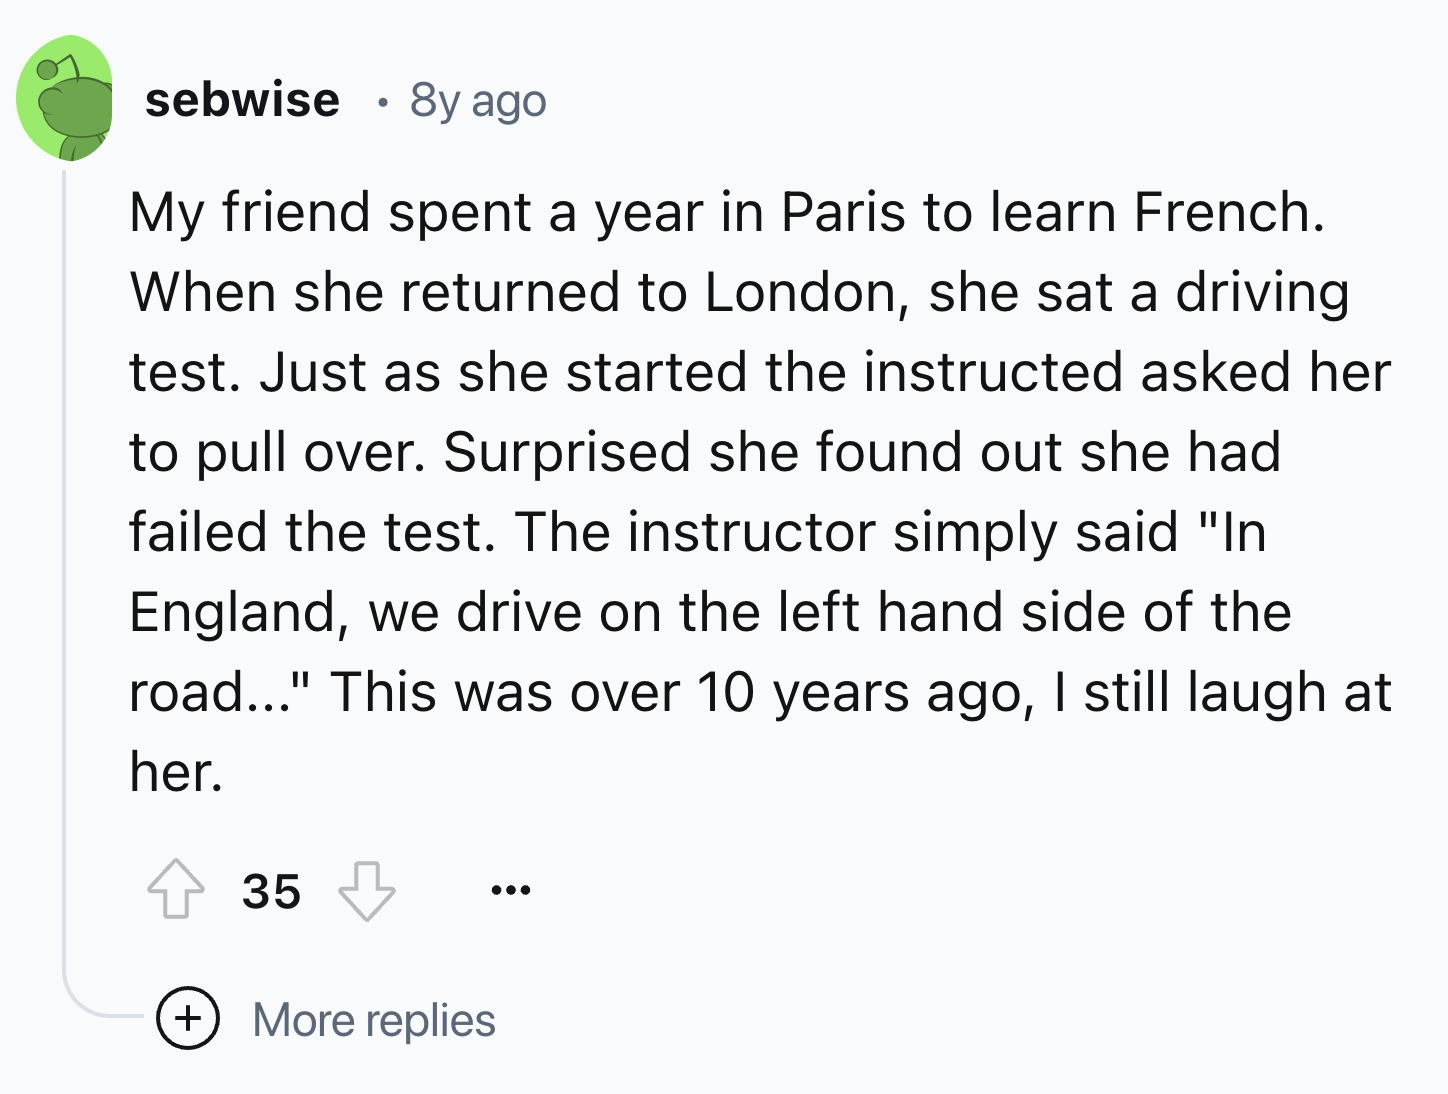 screenshot - sebwise 8y ago My friend spent a year in Paris to learn French. When she returned to London, she sat a driving test. Just as she started the instructed asked her to pull over. Surprised she found out she had failed the test. The instructor si